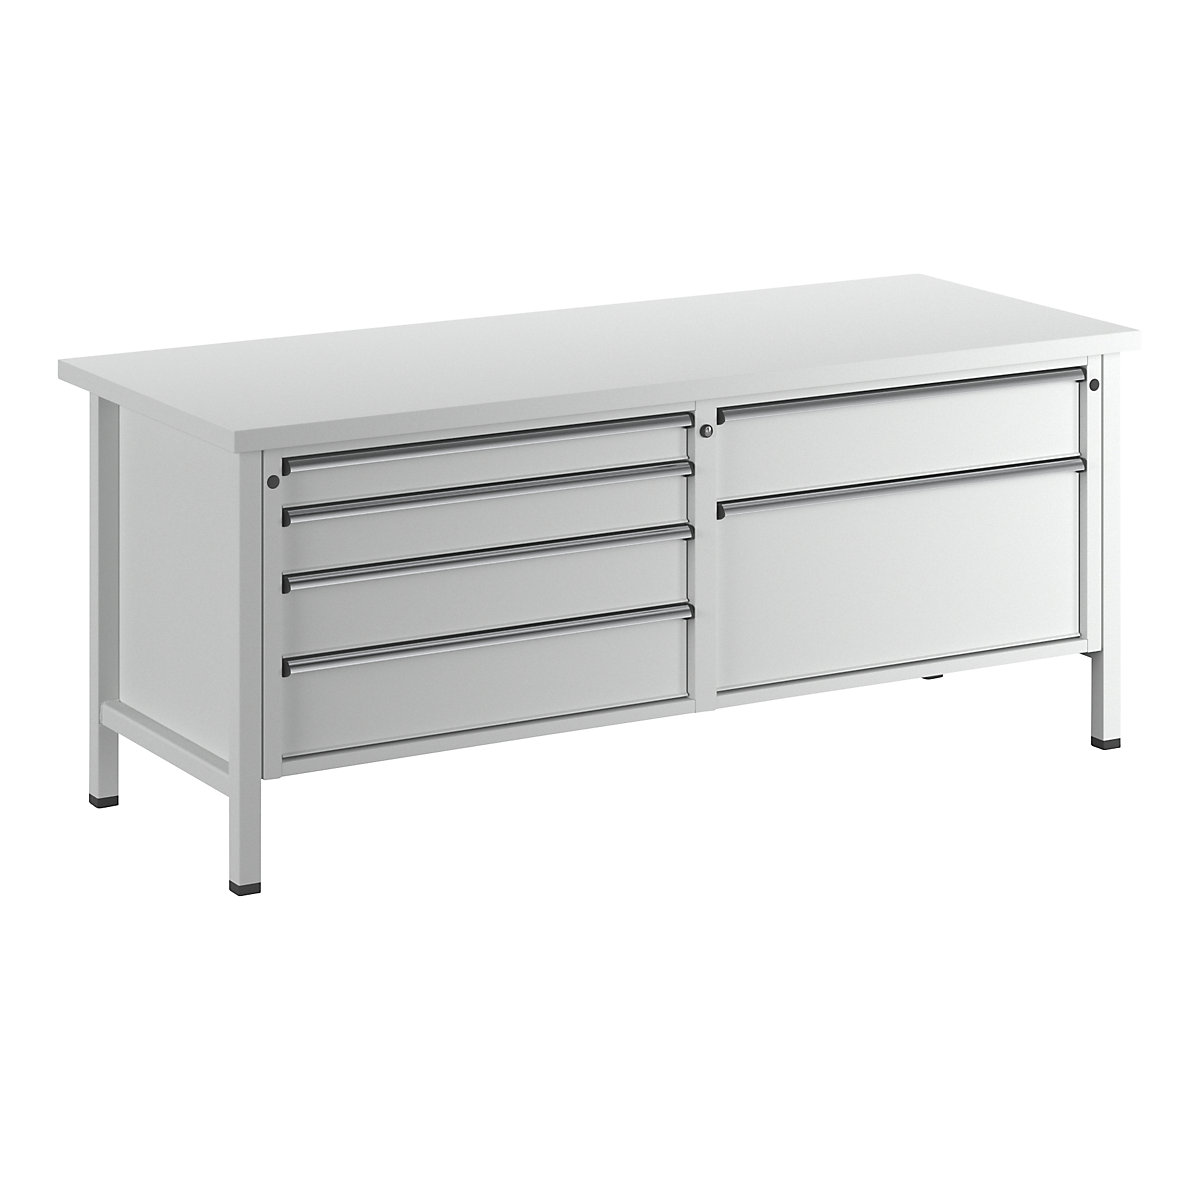 Workbench with XL/XXL drawers, frame construction – ANKE, width 2000 mm, 6 drawers, universal worktop, front in light grey-9